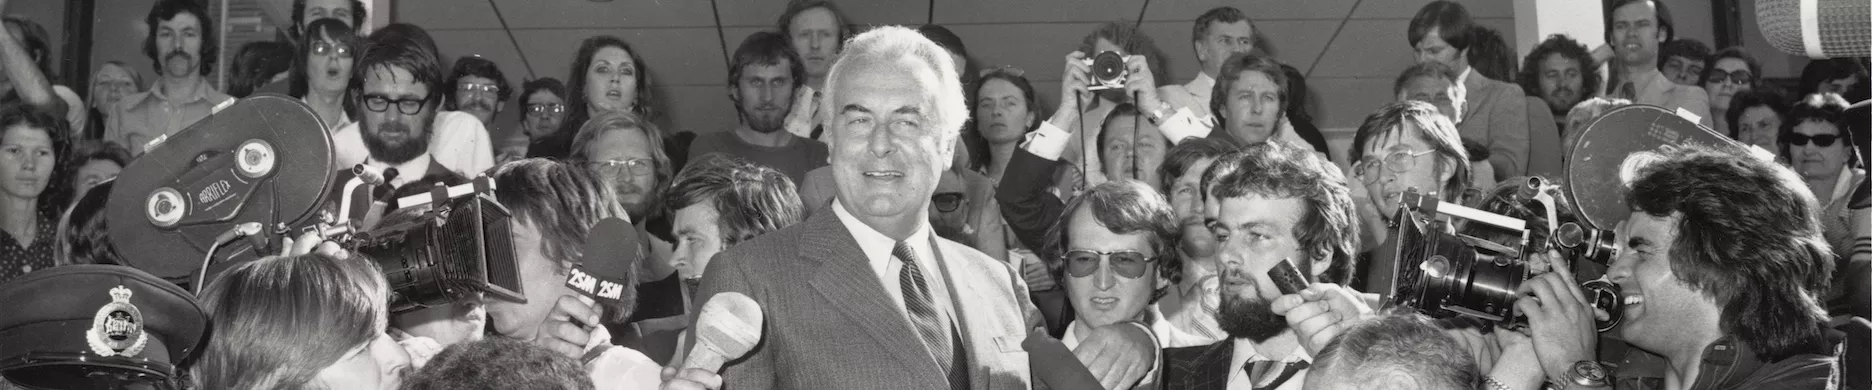 Photograph of Gough Whitlam on the front steps during his dismissal on the 11th of November 1975